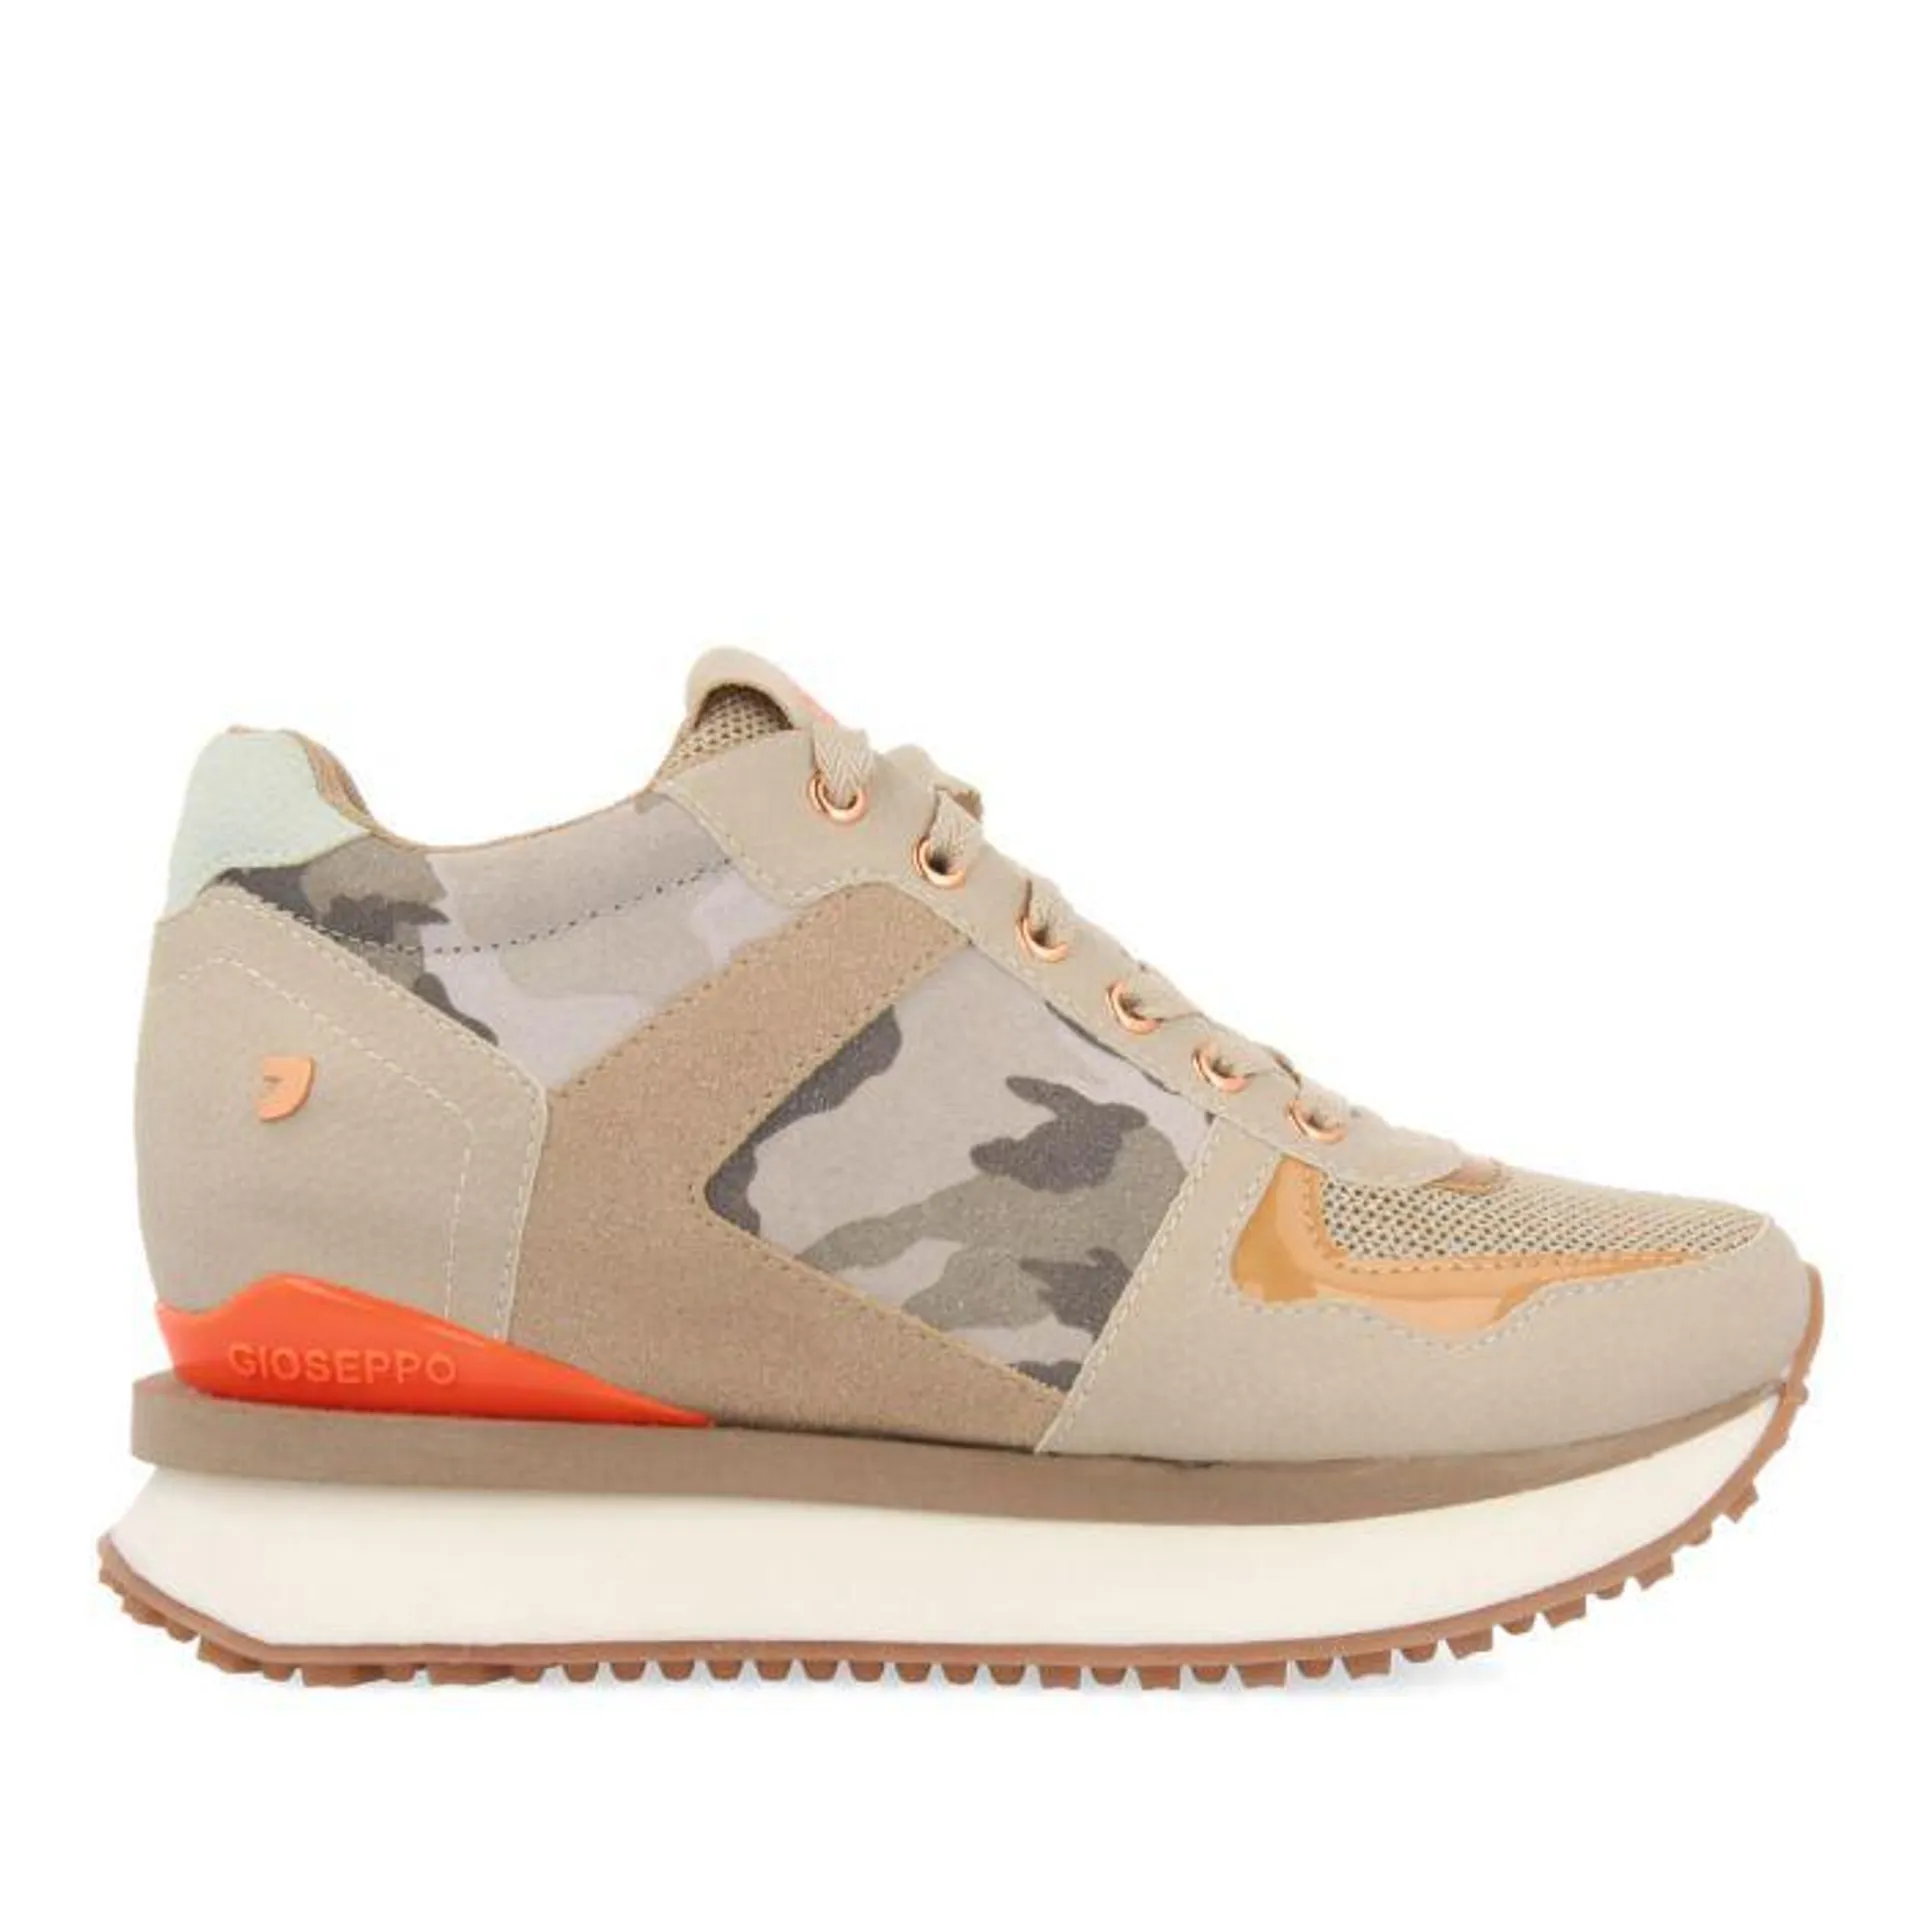 Welscheid women's camouflage sneakers with inner wedges, featuring orange, gold, beige and mint green